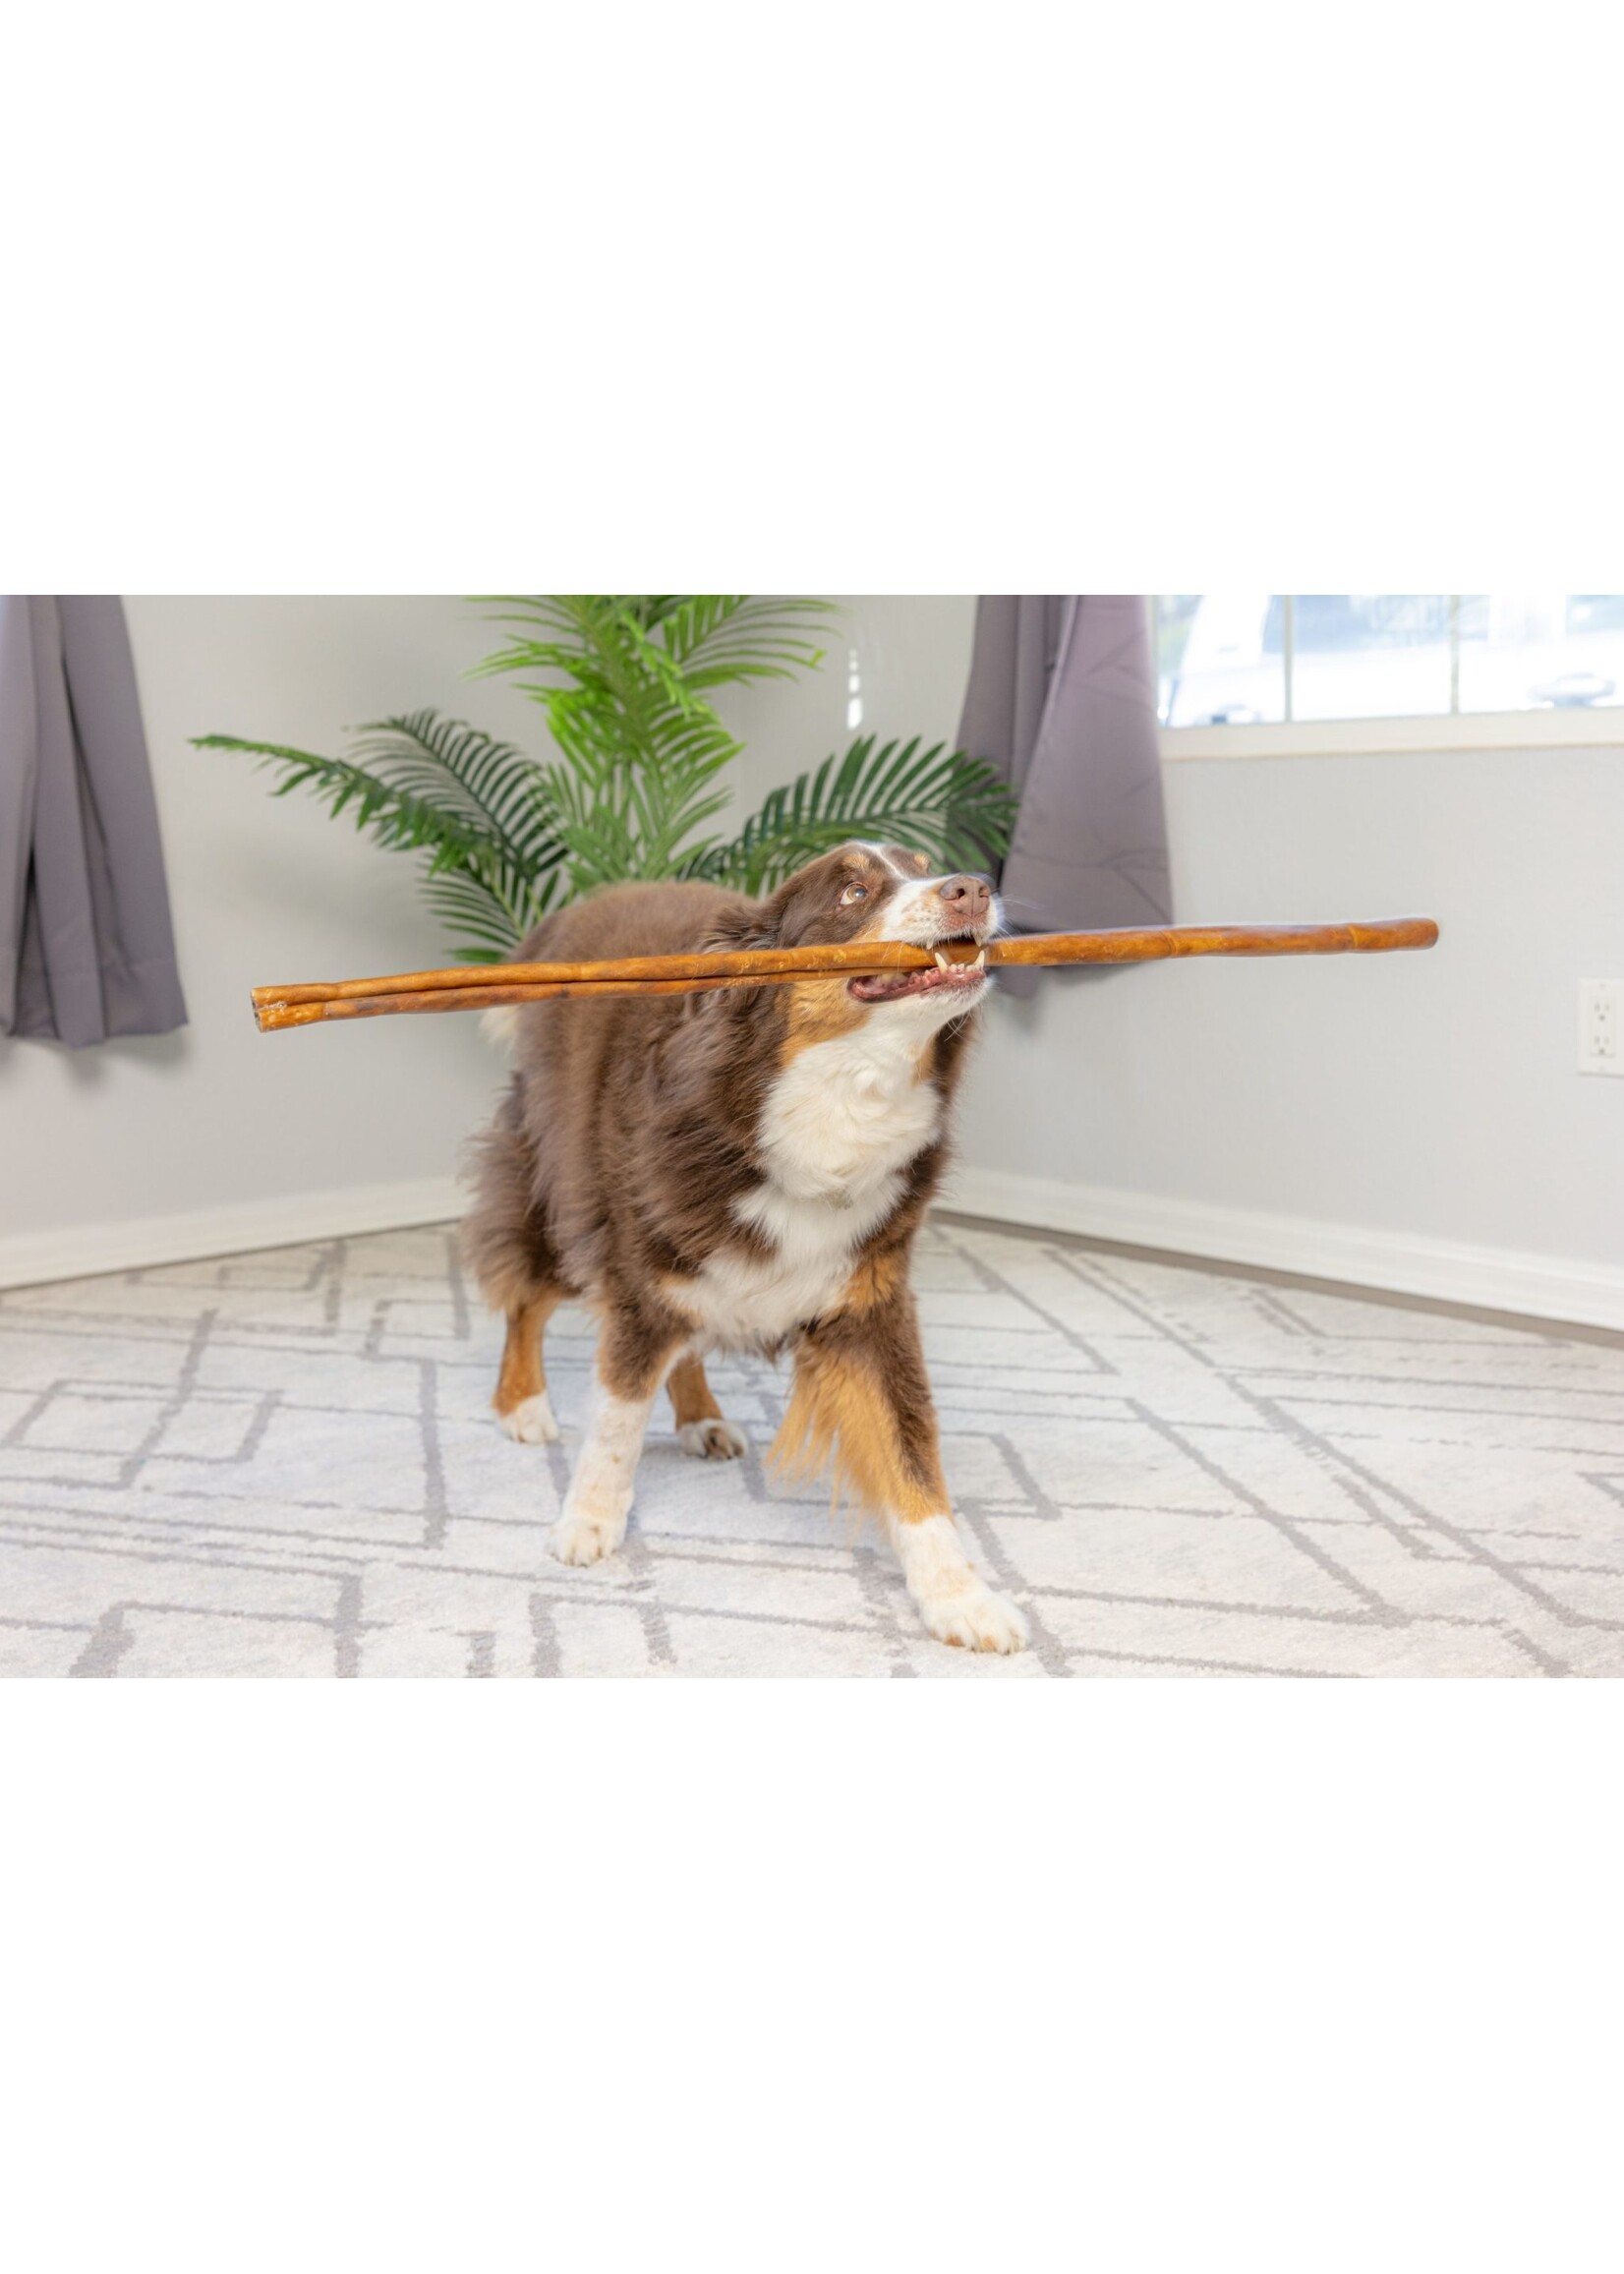 Tuesday's Natural Dog Company Odor Free Cane Bully Stick 24 inches (2 Feet Long)